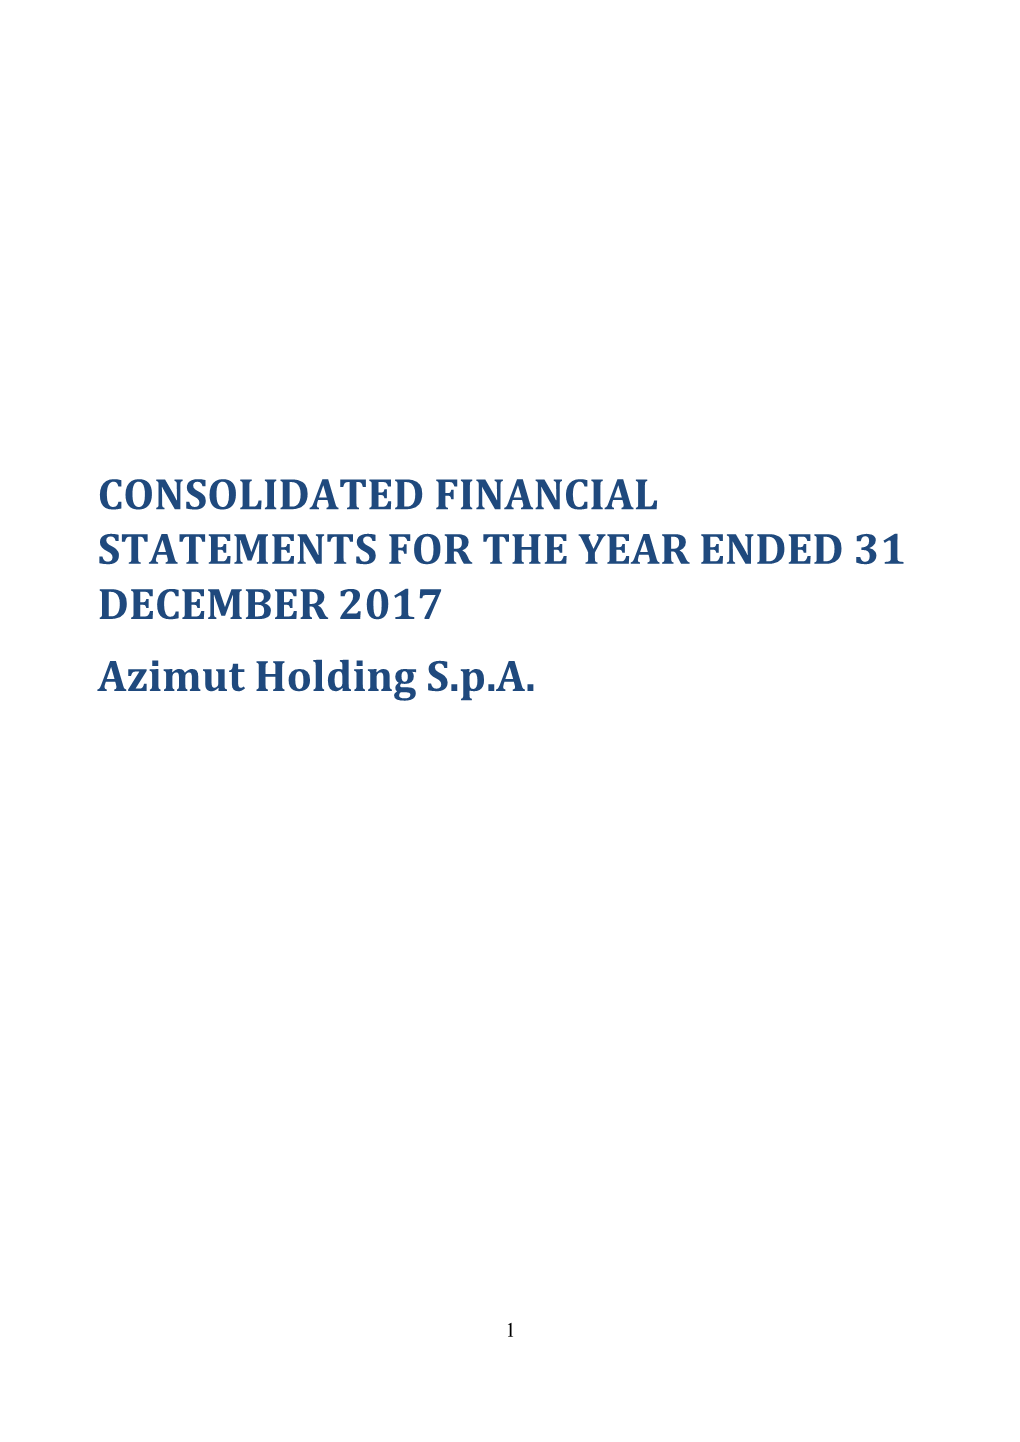 CONSOLIDATED FINANCIAL STATEMENTS for the YEAR ENDED 31 DECEMBER 2017 Azimut Holding S.P.A